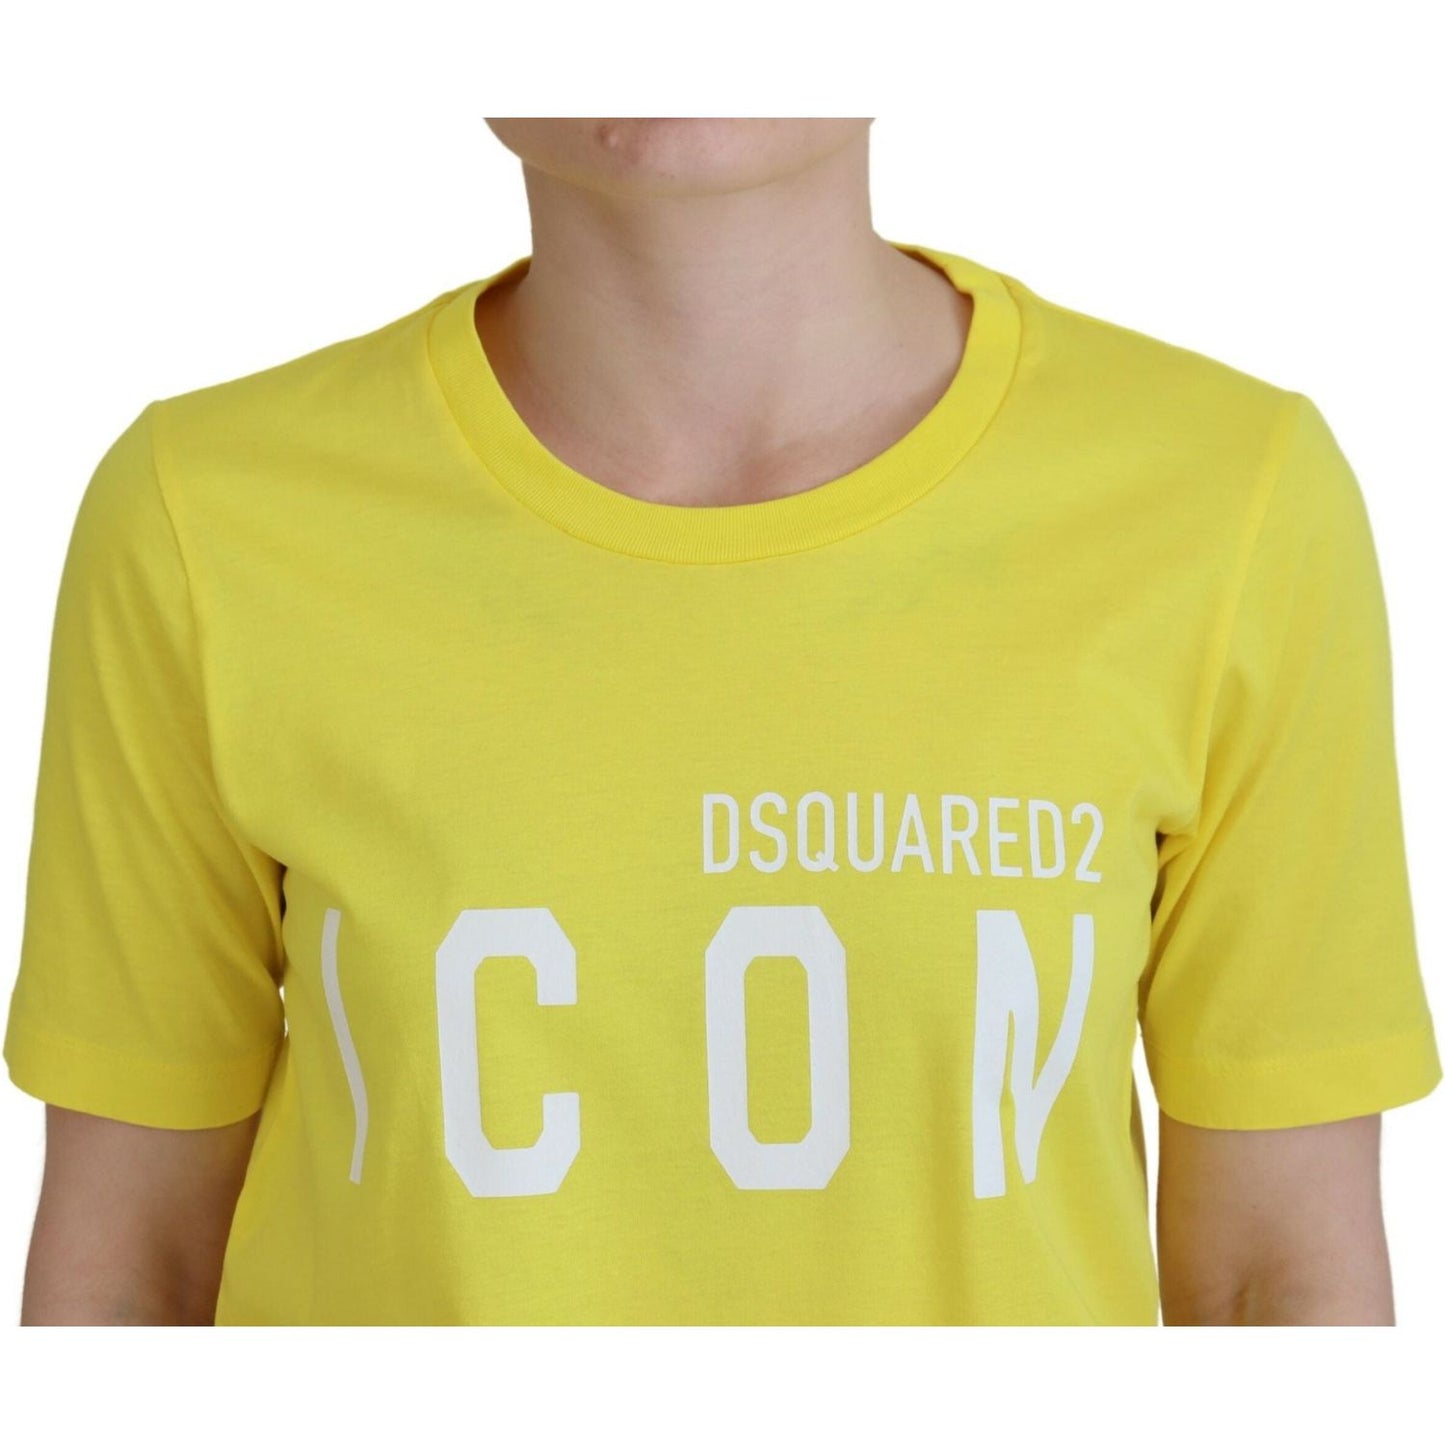 Dsquared² Yellow CottonShiny Icon Renny Dress Crewneck T-shirt yellow-cottonshiny-icon-renny-dress-crewneck-t-shirt